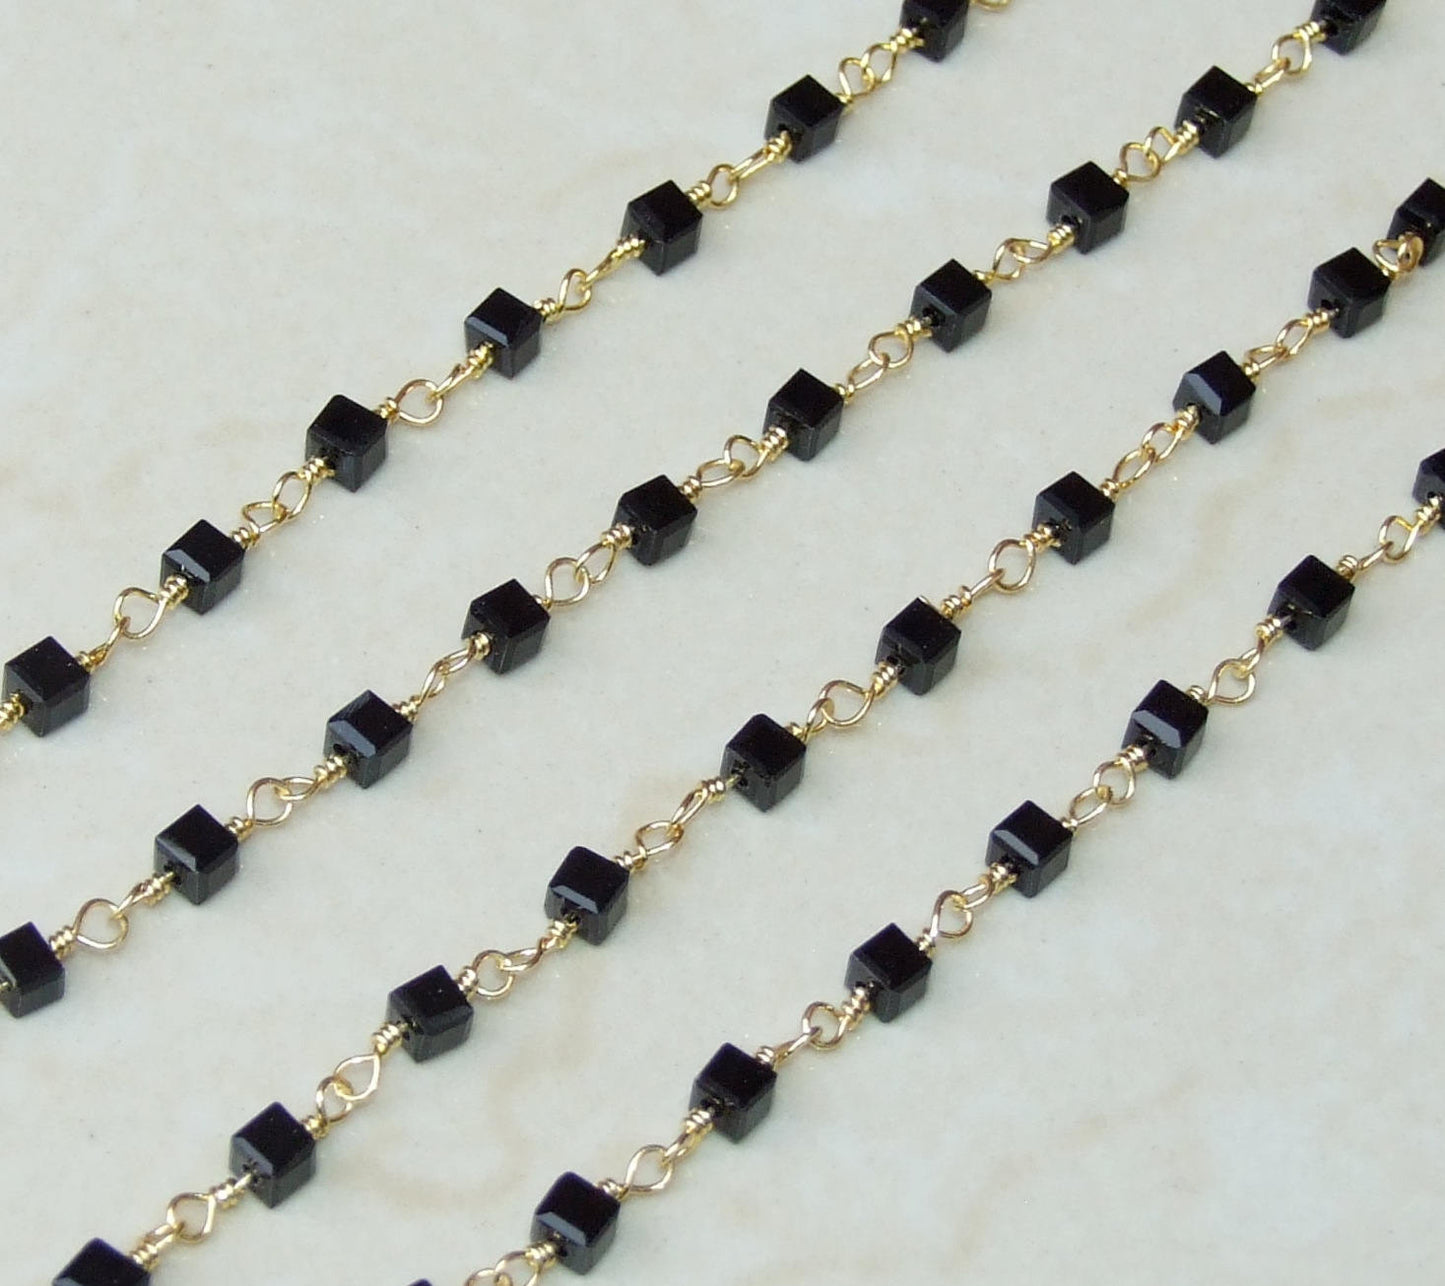 Black Onyx Rosary Chain, Bulk Chain, Rondelle Glass Beads, Beaded Chain, Body Chain Jewelry, Gold Chain, Necklace Chain, Belly Chain